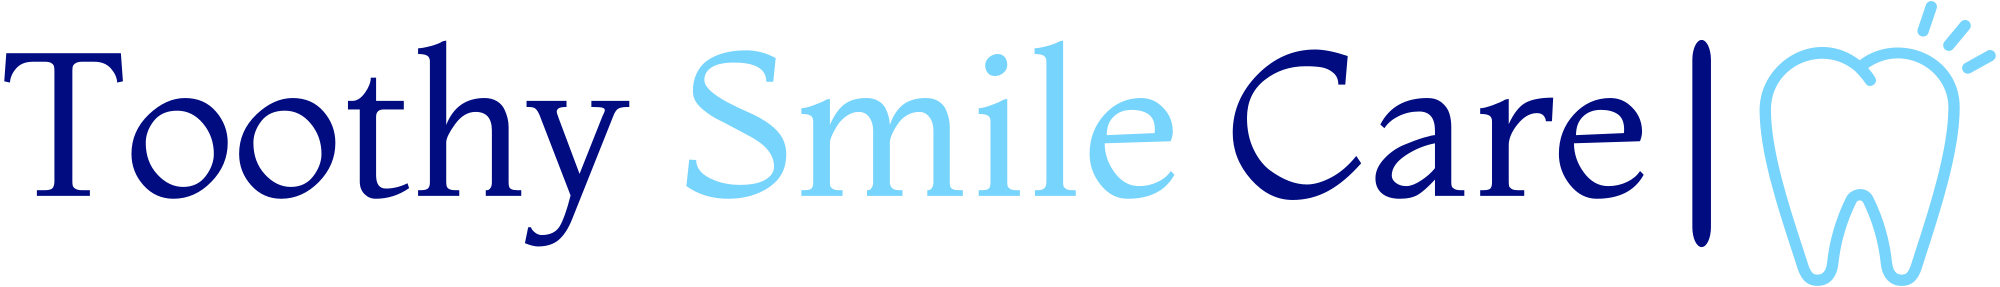 Toothy Smile Care